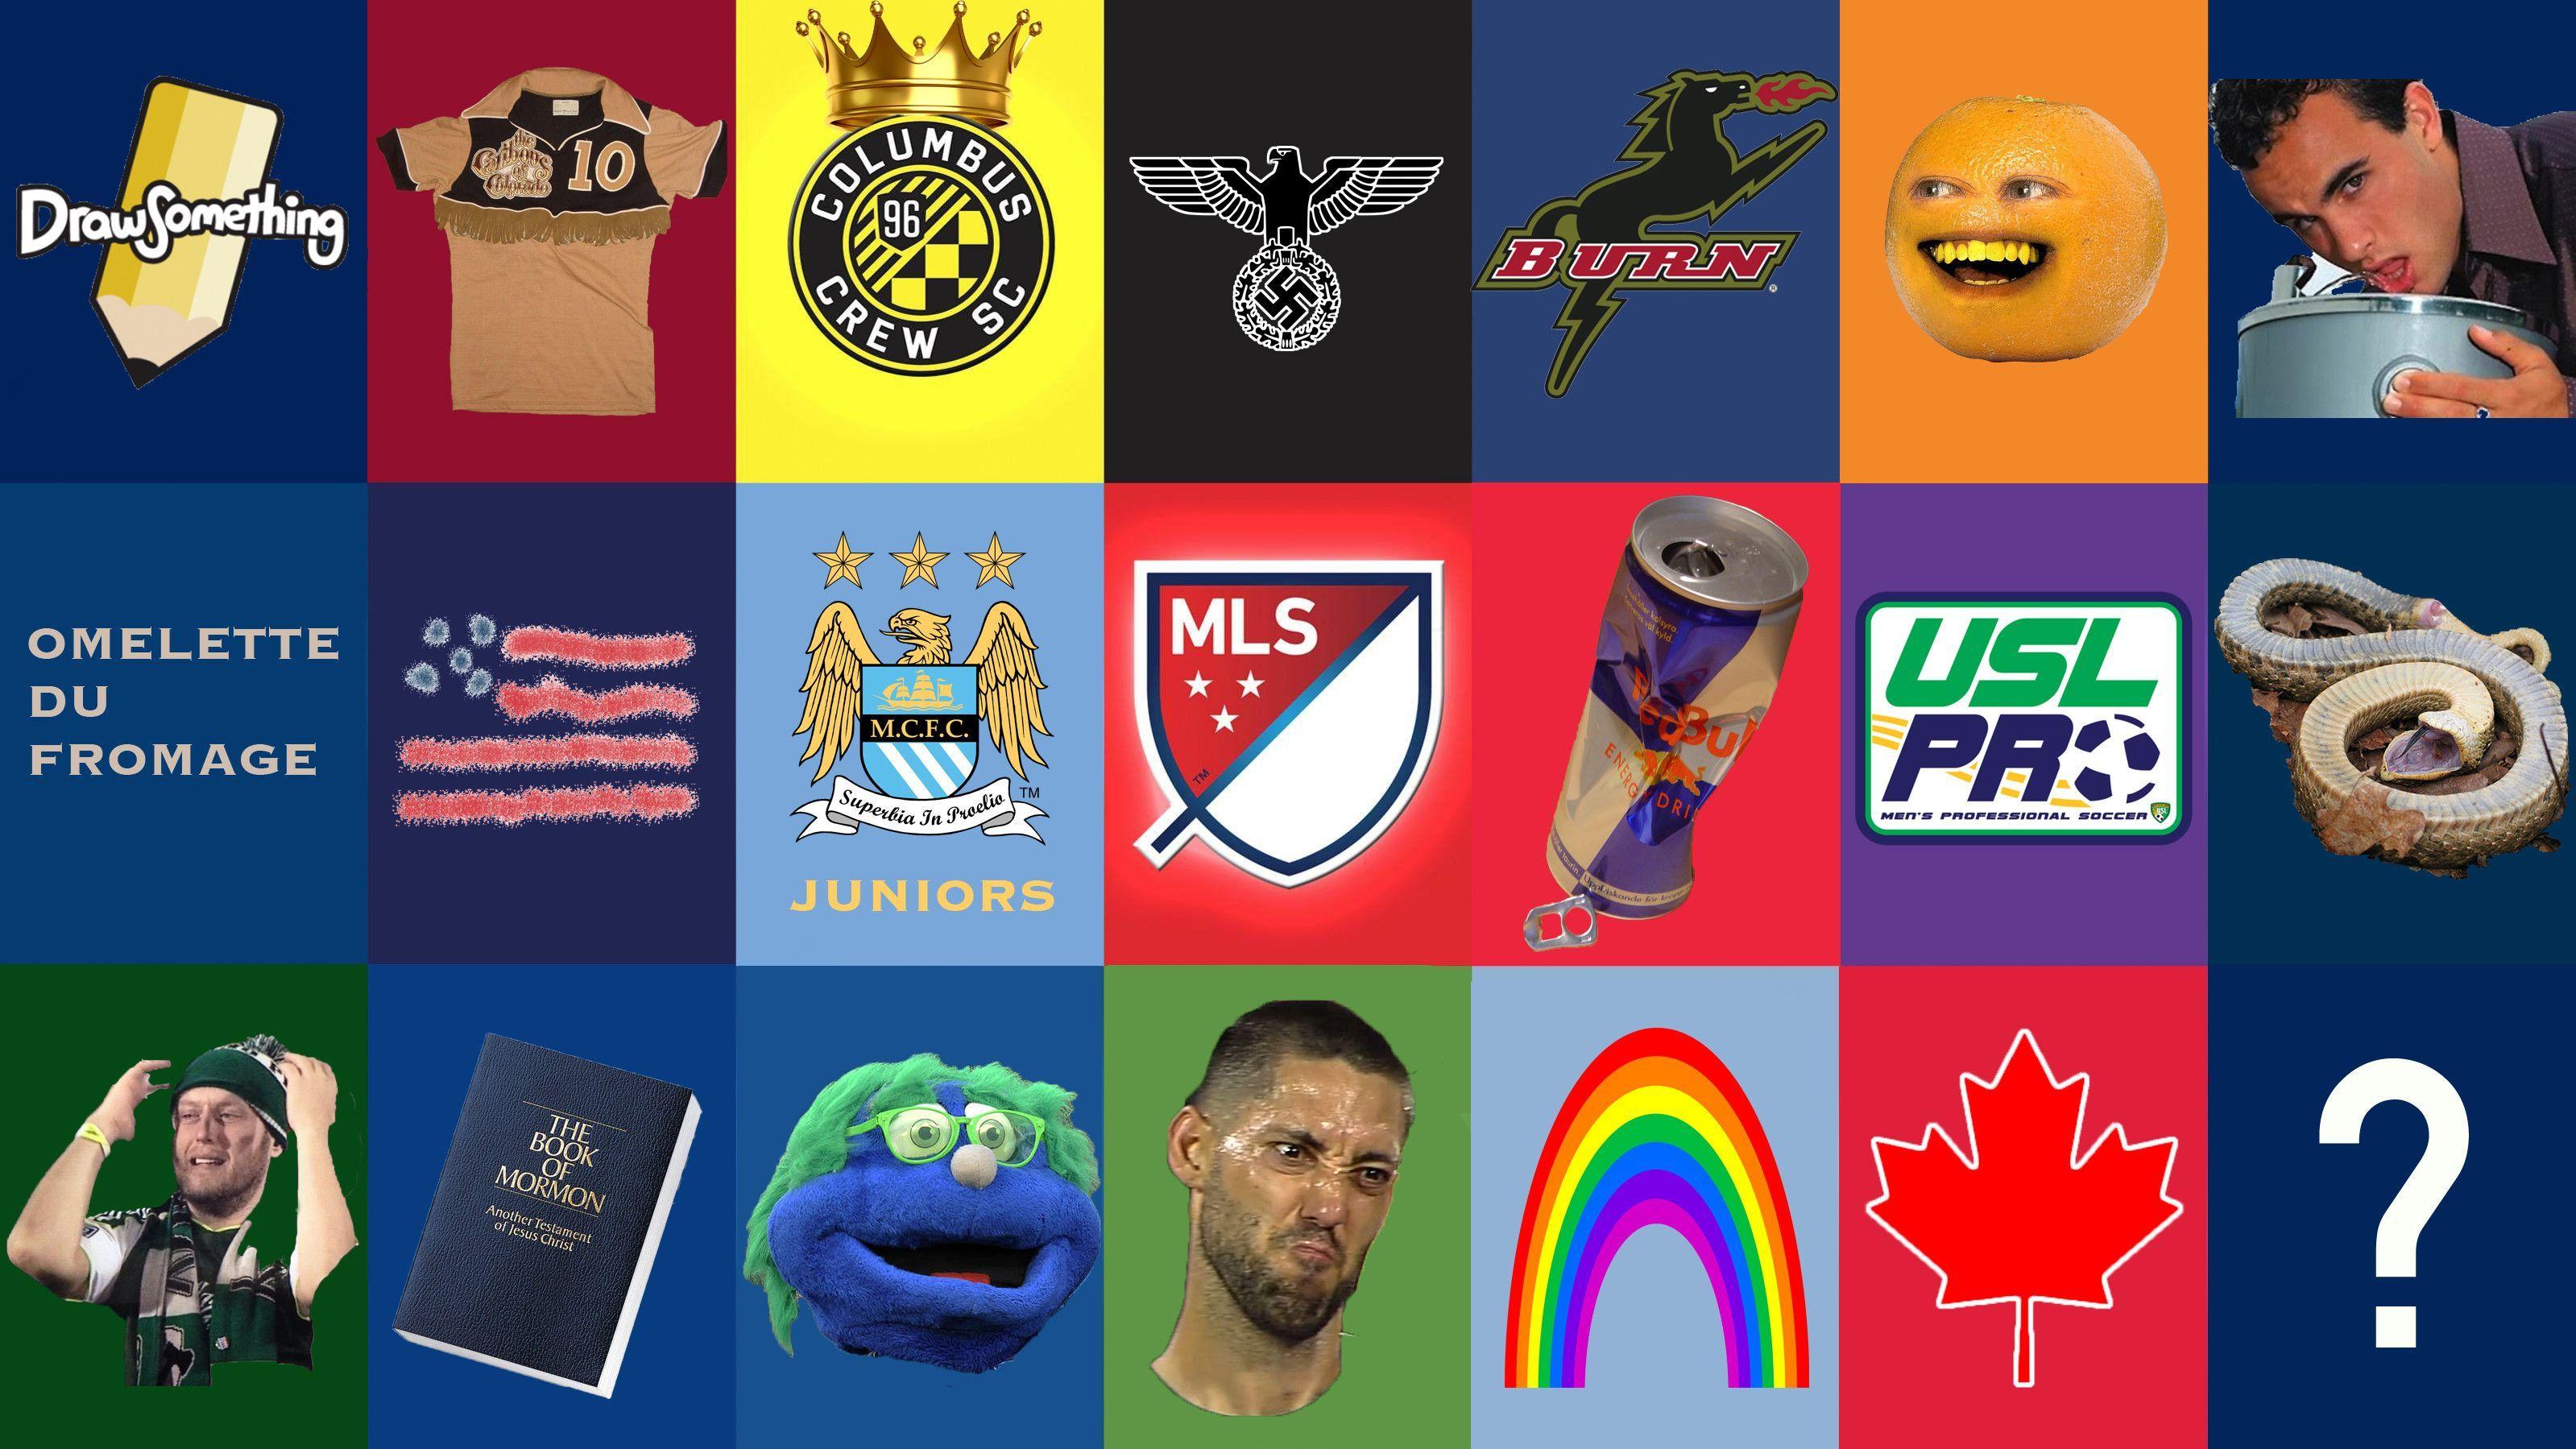 I made an MLS wallpaper because I'm snowed in. You can use it if